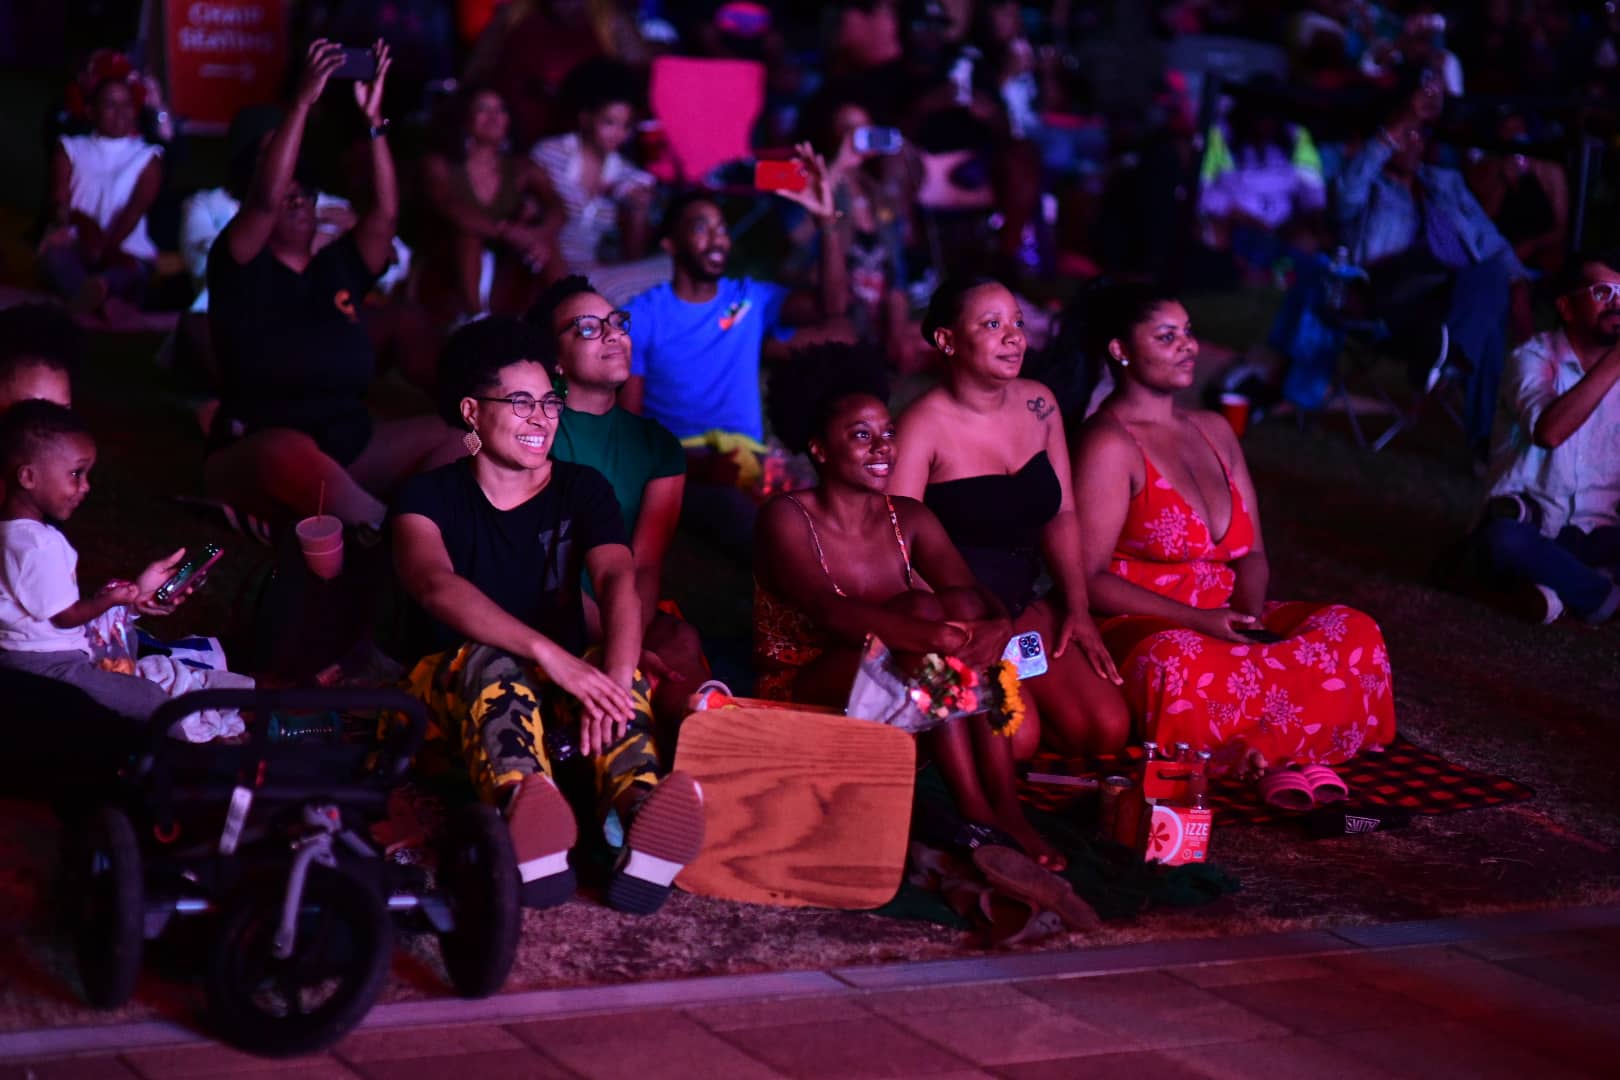 People enjoy free concerts at Discovery Green during UHD Thursday Night Concerts. Photo by Jamaal Ellis.